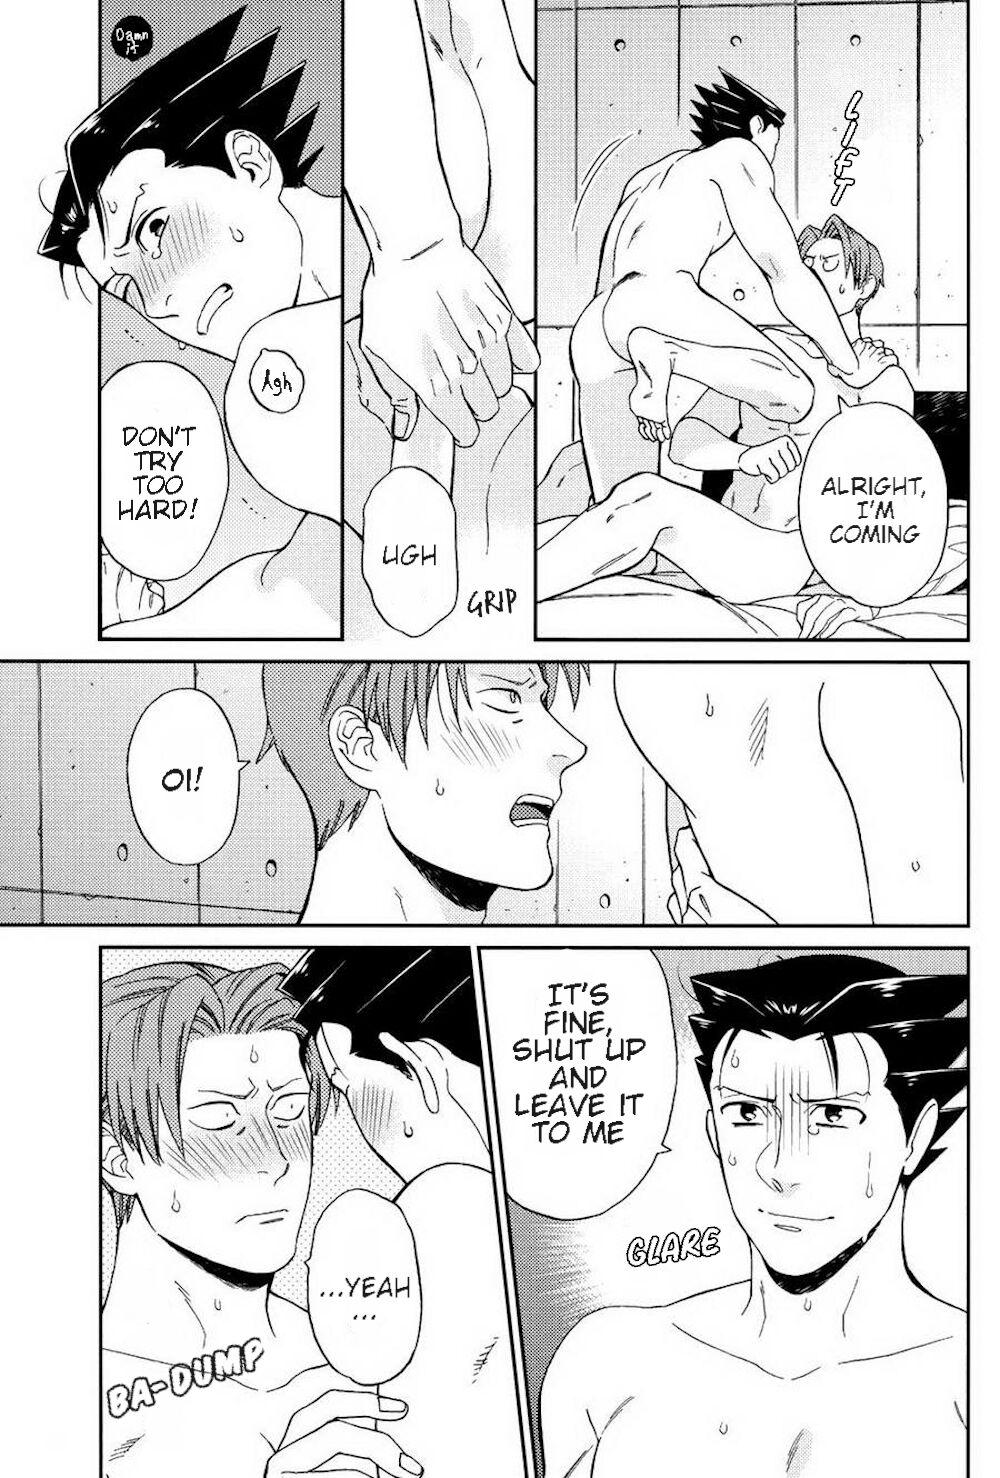 Hole Kid who can do it if he tries, kid who can't - Ace attorney | gyakuten saiban Stepdaughter - Page 10